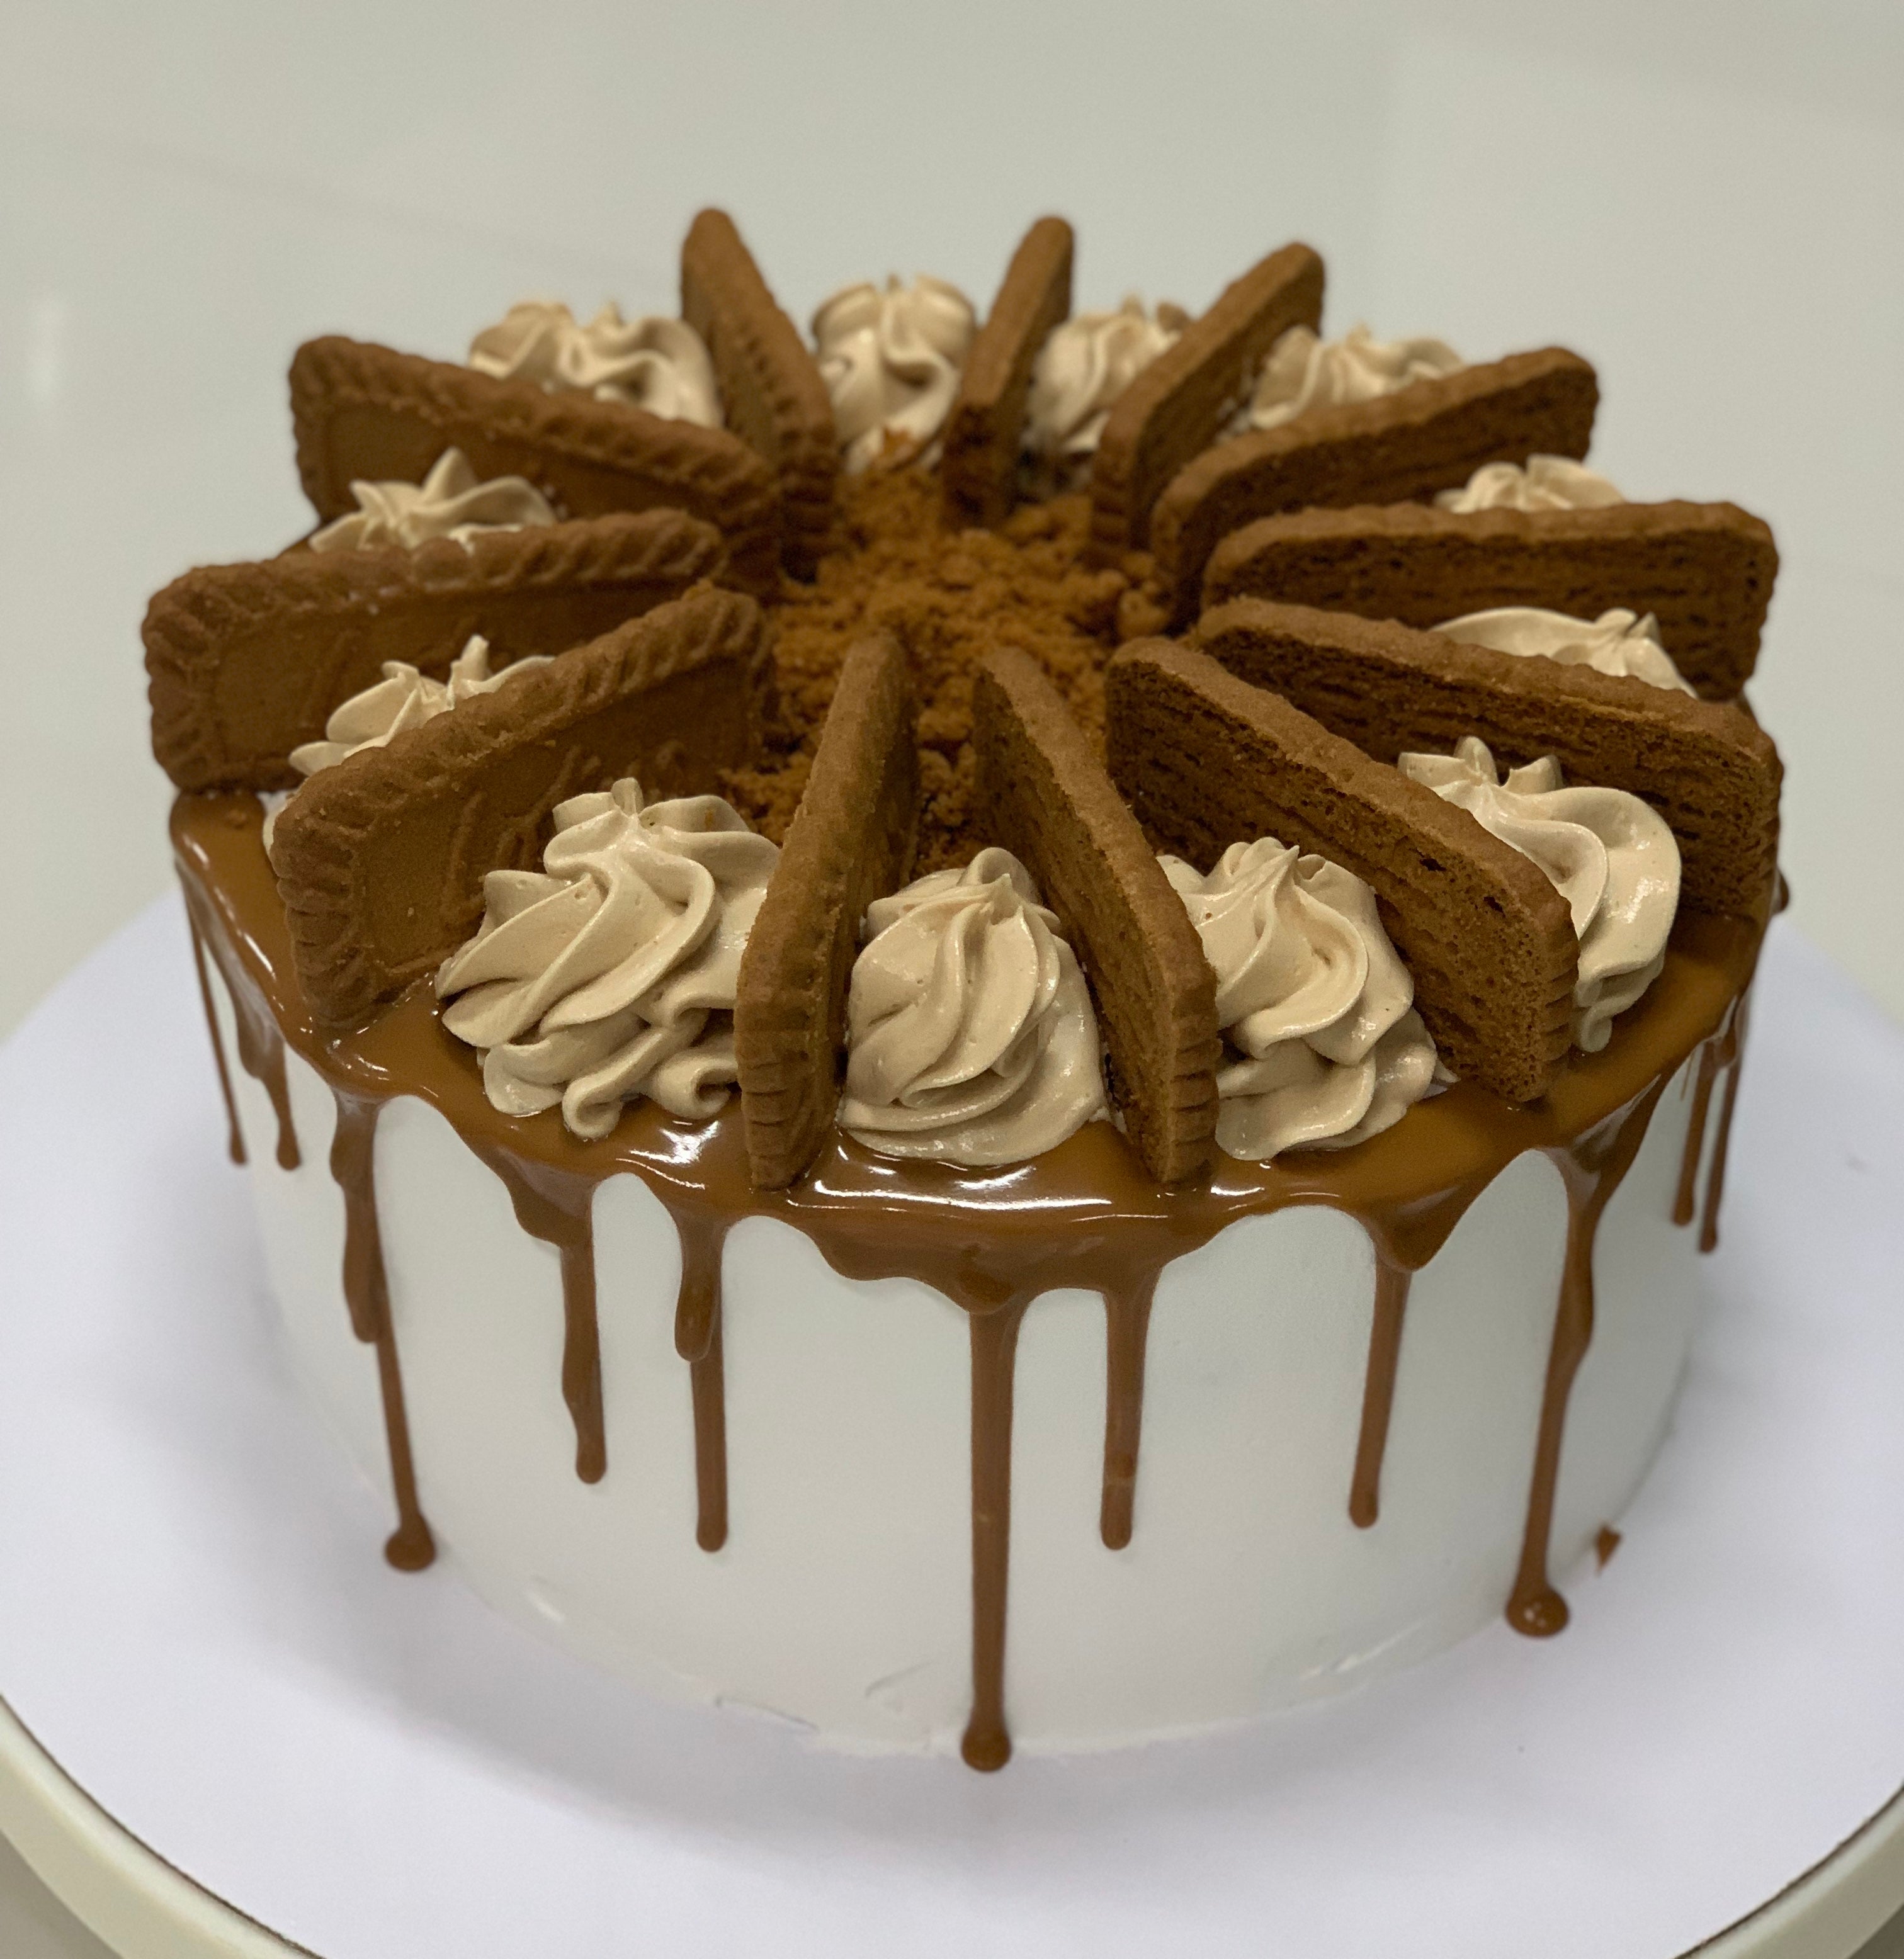 Cookie Butter Cake (Biscoff Cake with Biscoff Buttercream!)